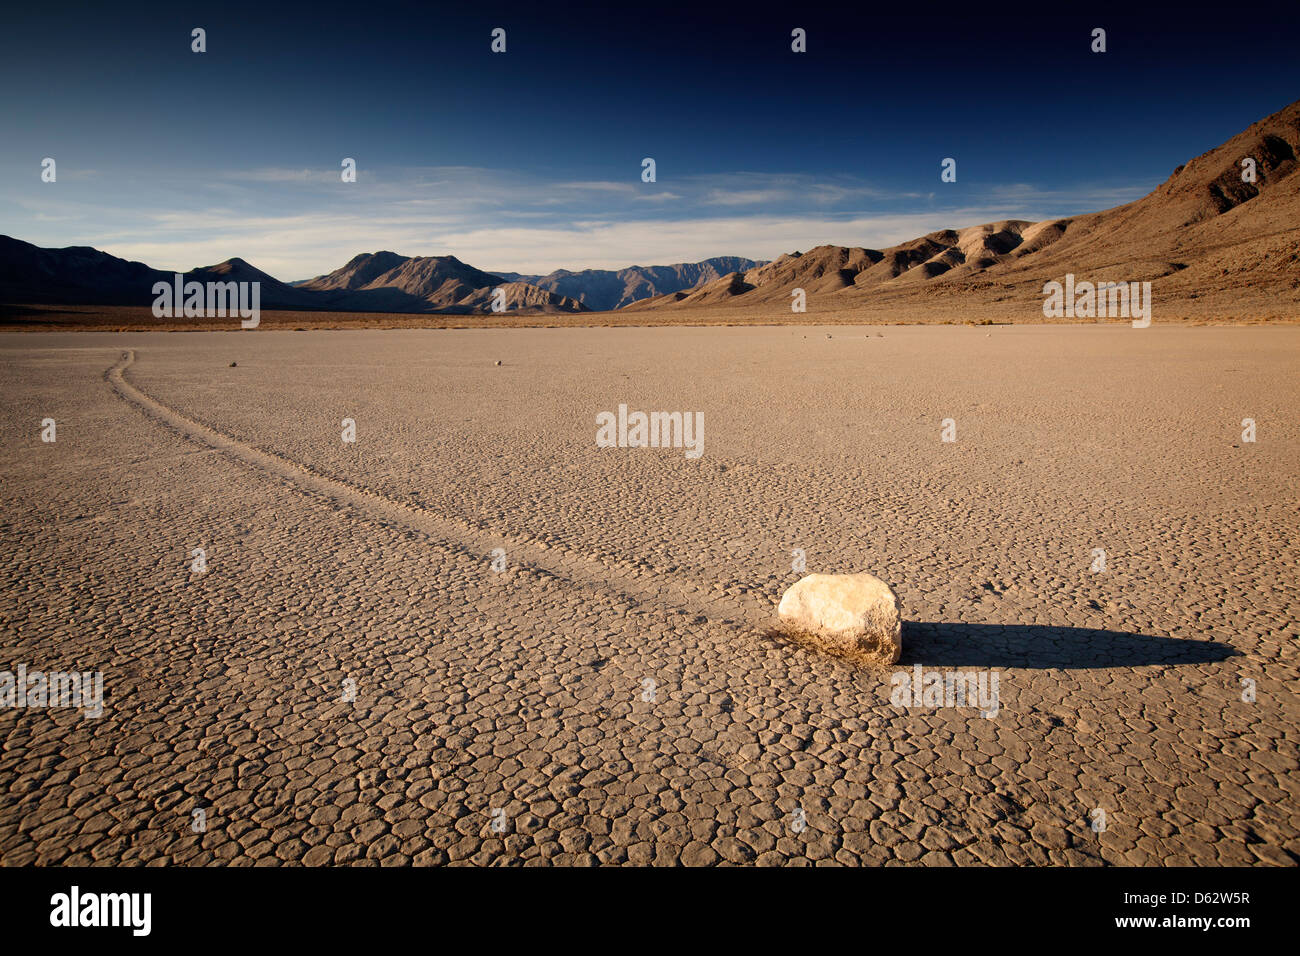 Moving rock at The Racetrack, Death valley, California, USA Stock Photo